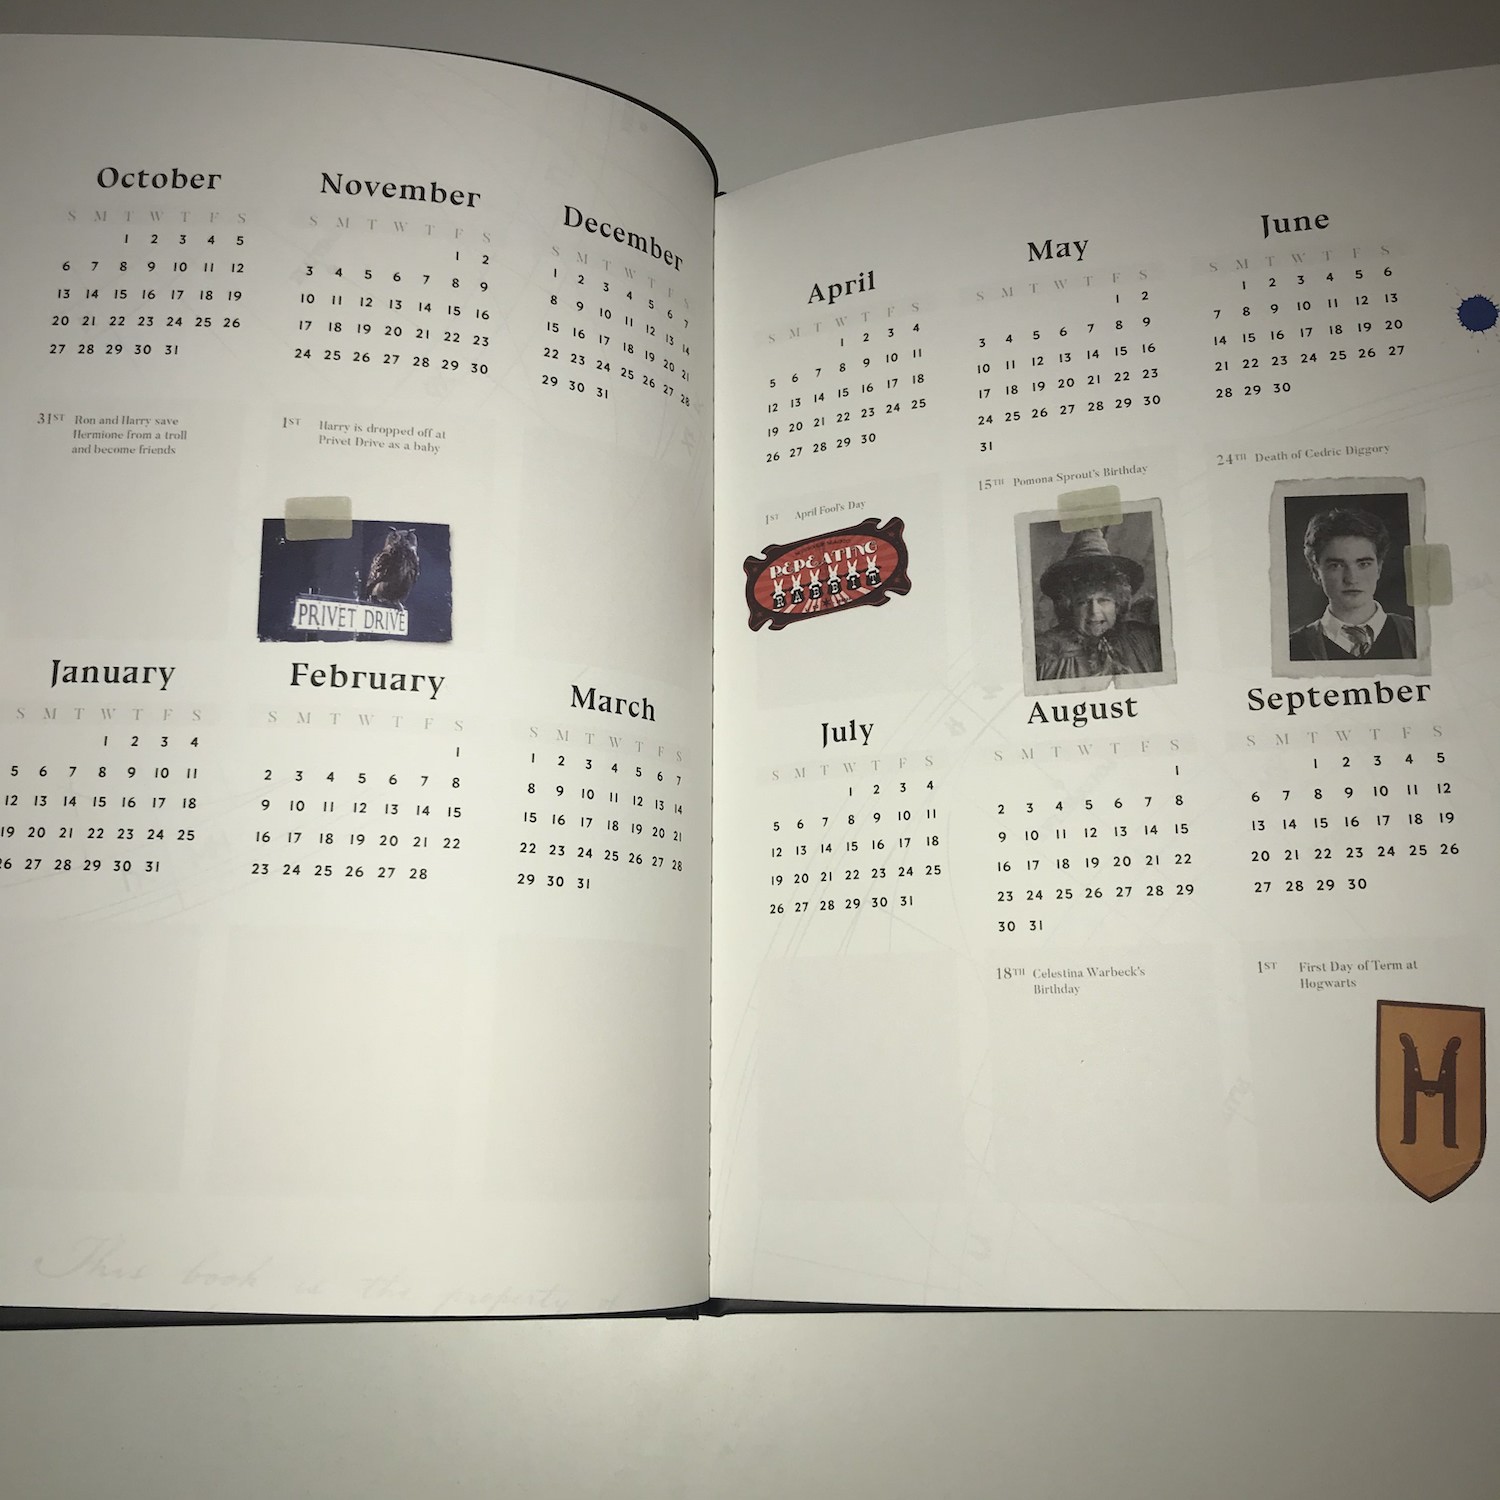 The journal contains a year calendar from October 2019 to September 2020 and highlights special dates related to your Hogwarts House.